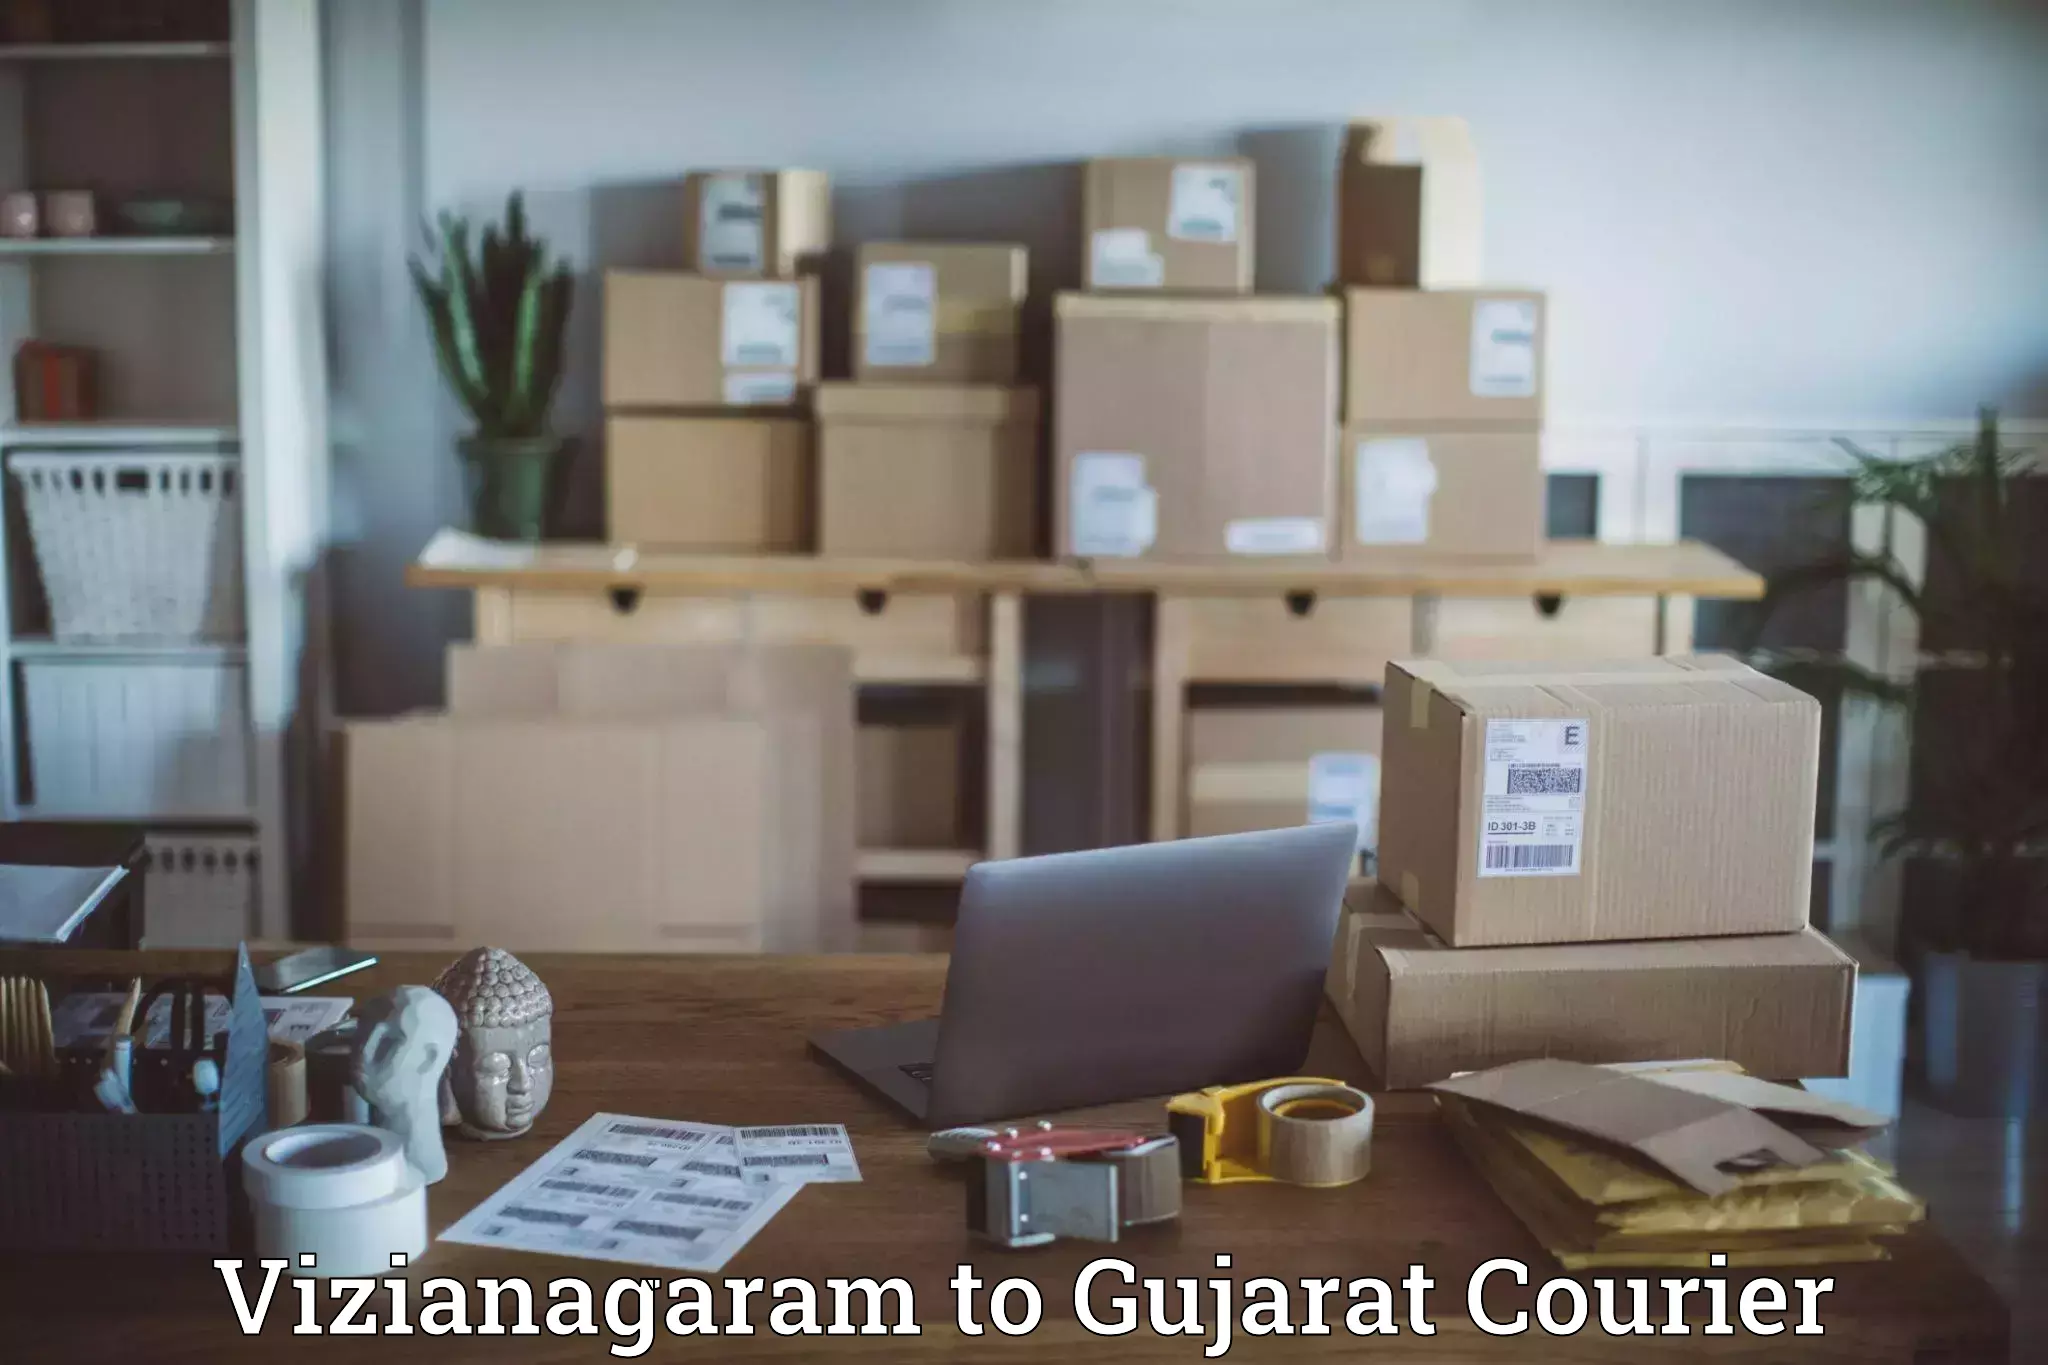 Express delivery network Vizianagaram to Dharamgarh